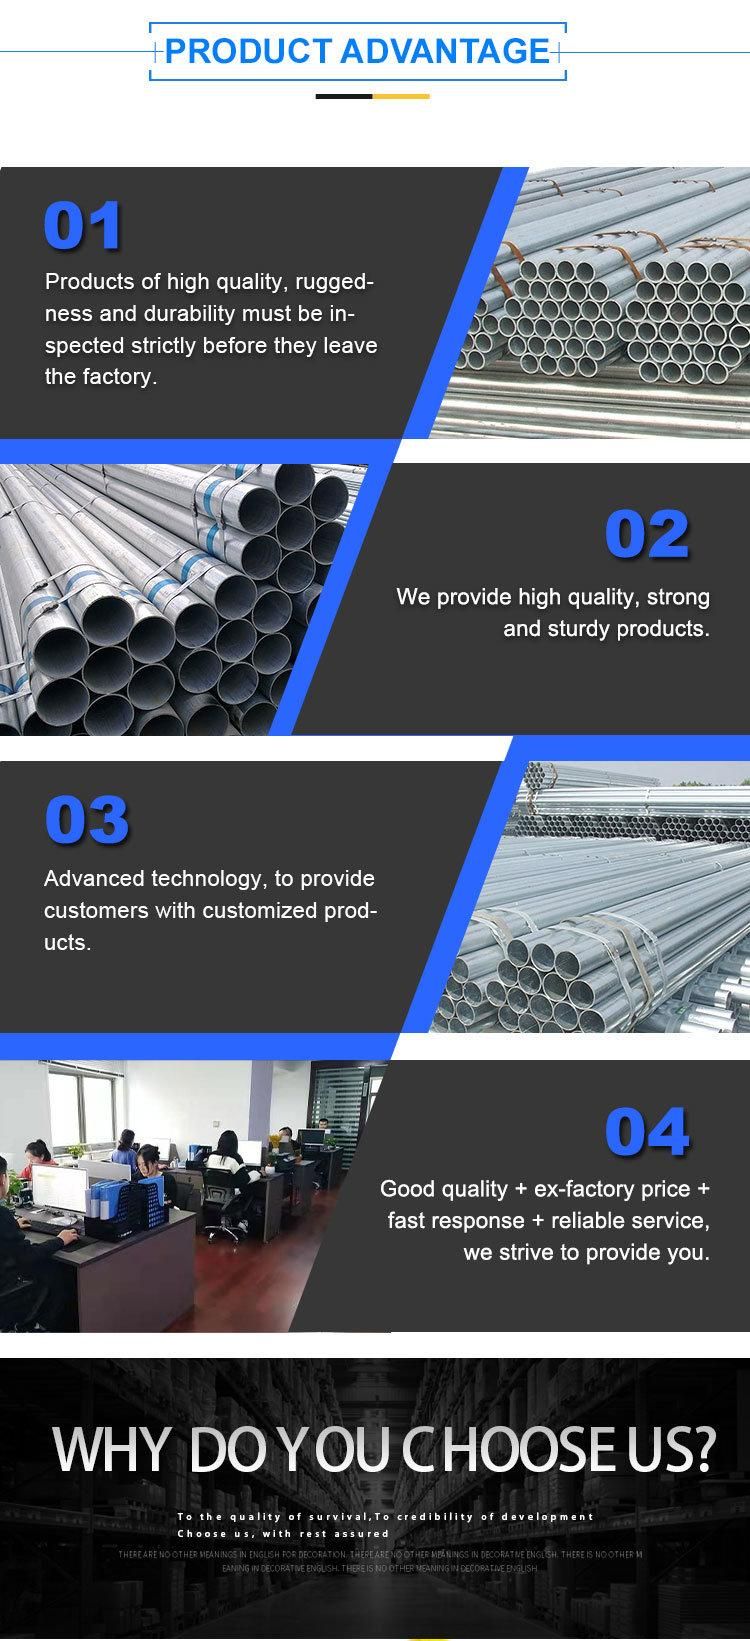 Chemical Industry at Any Moment API 5CT Casing Pipe Galvanized Steel Tube